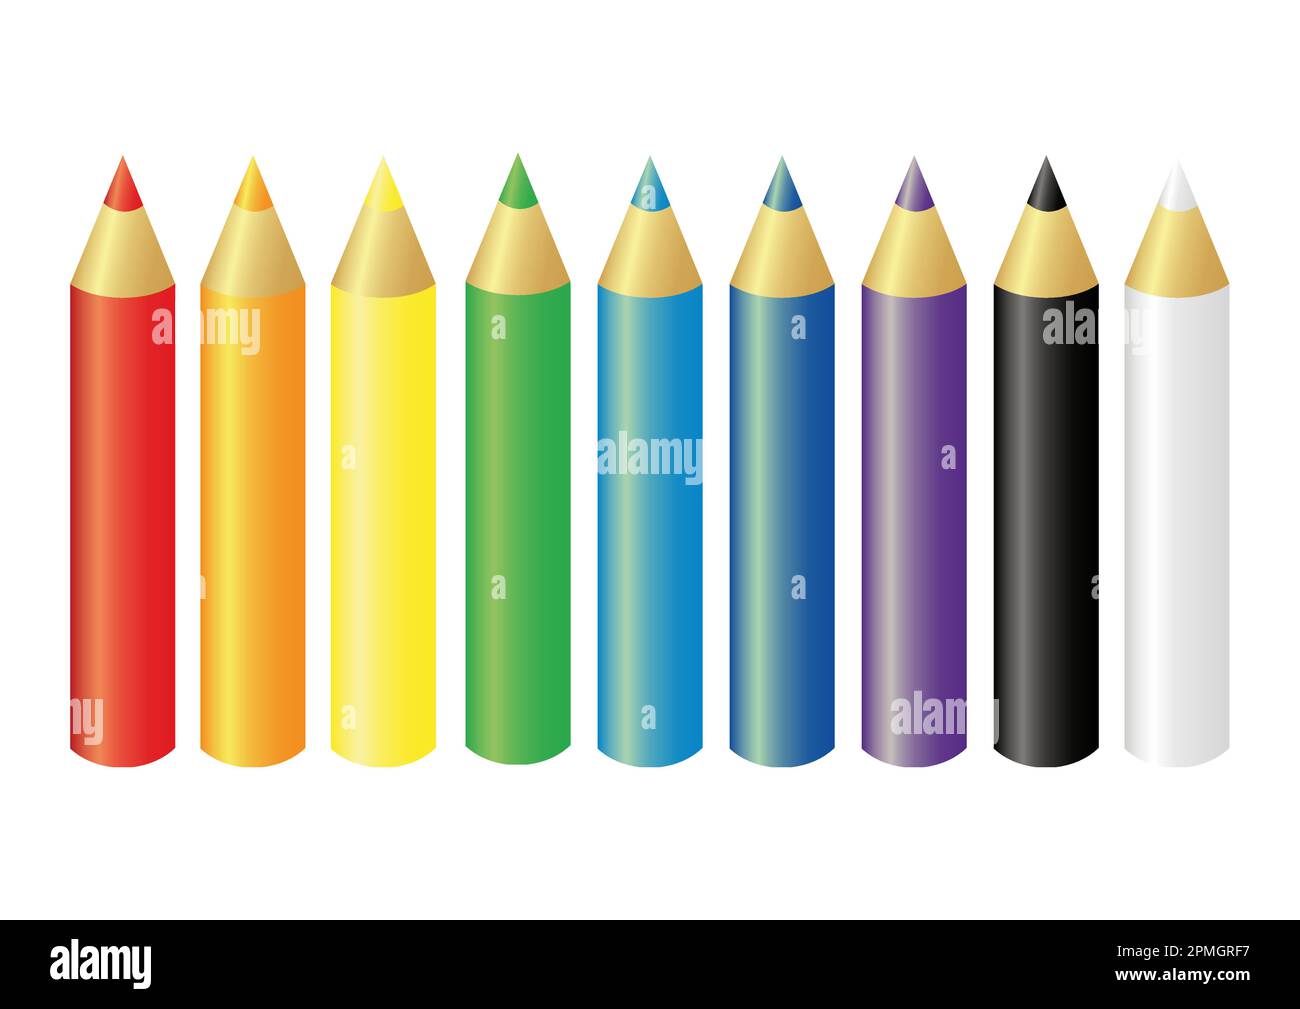 Subjects for drawing. Colored pencils, crayons, markers and paints on white  background Stock Photo - Alamy